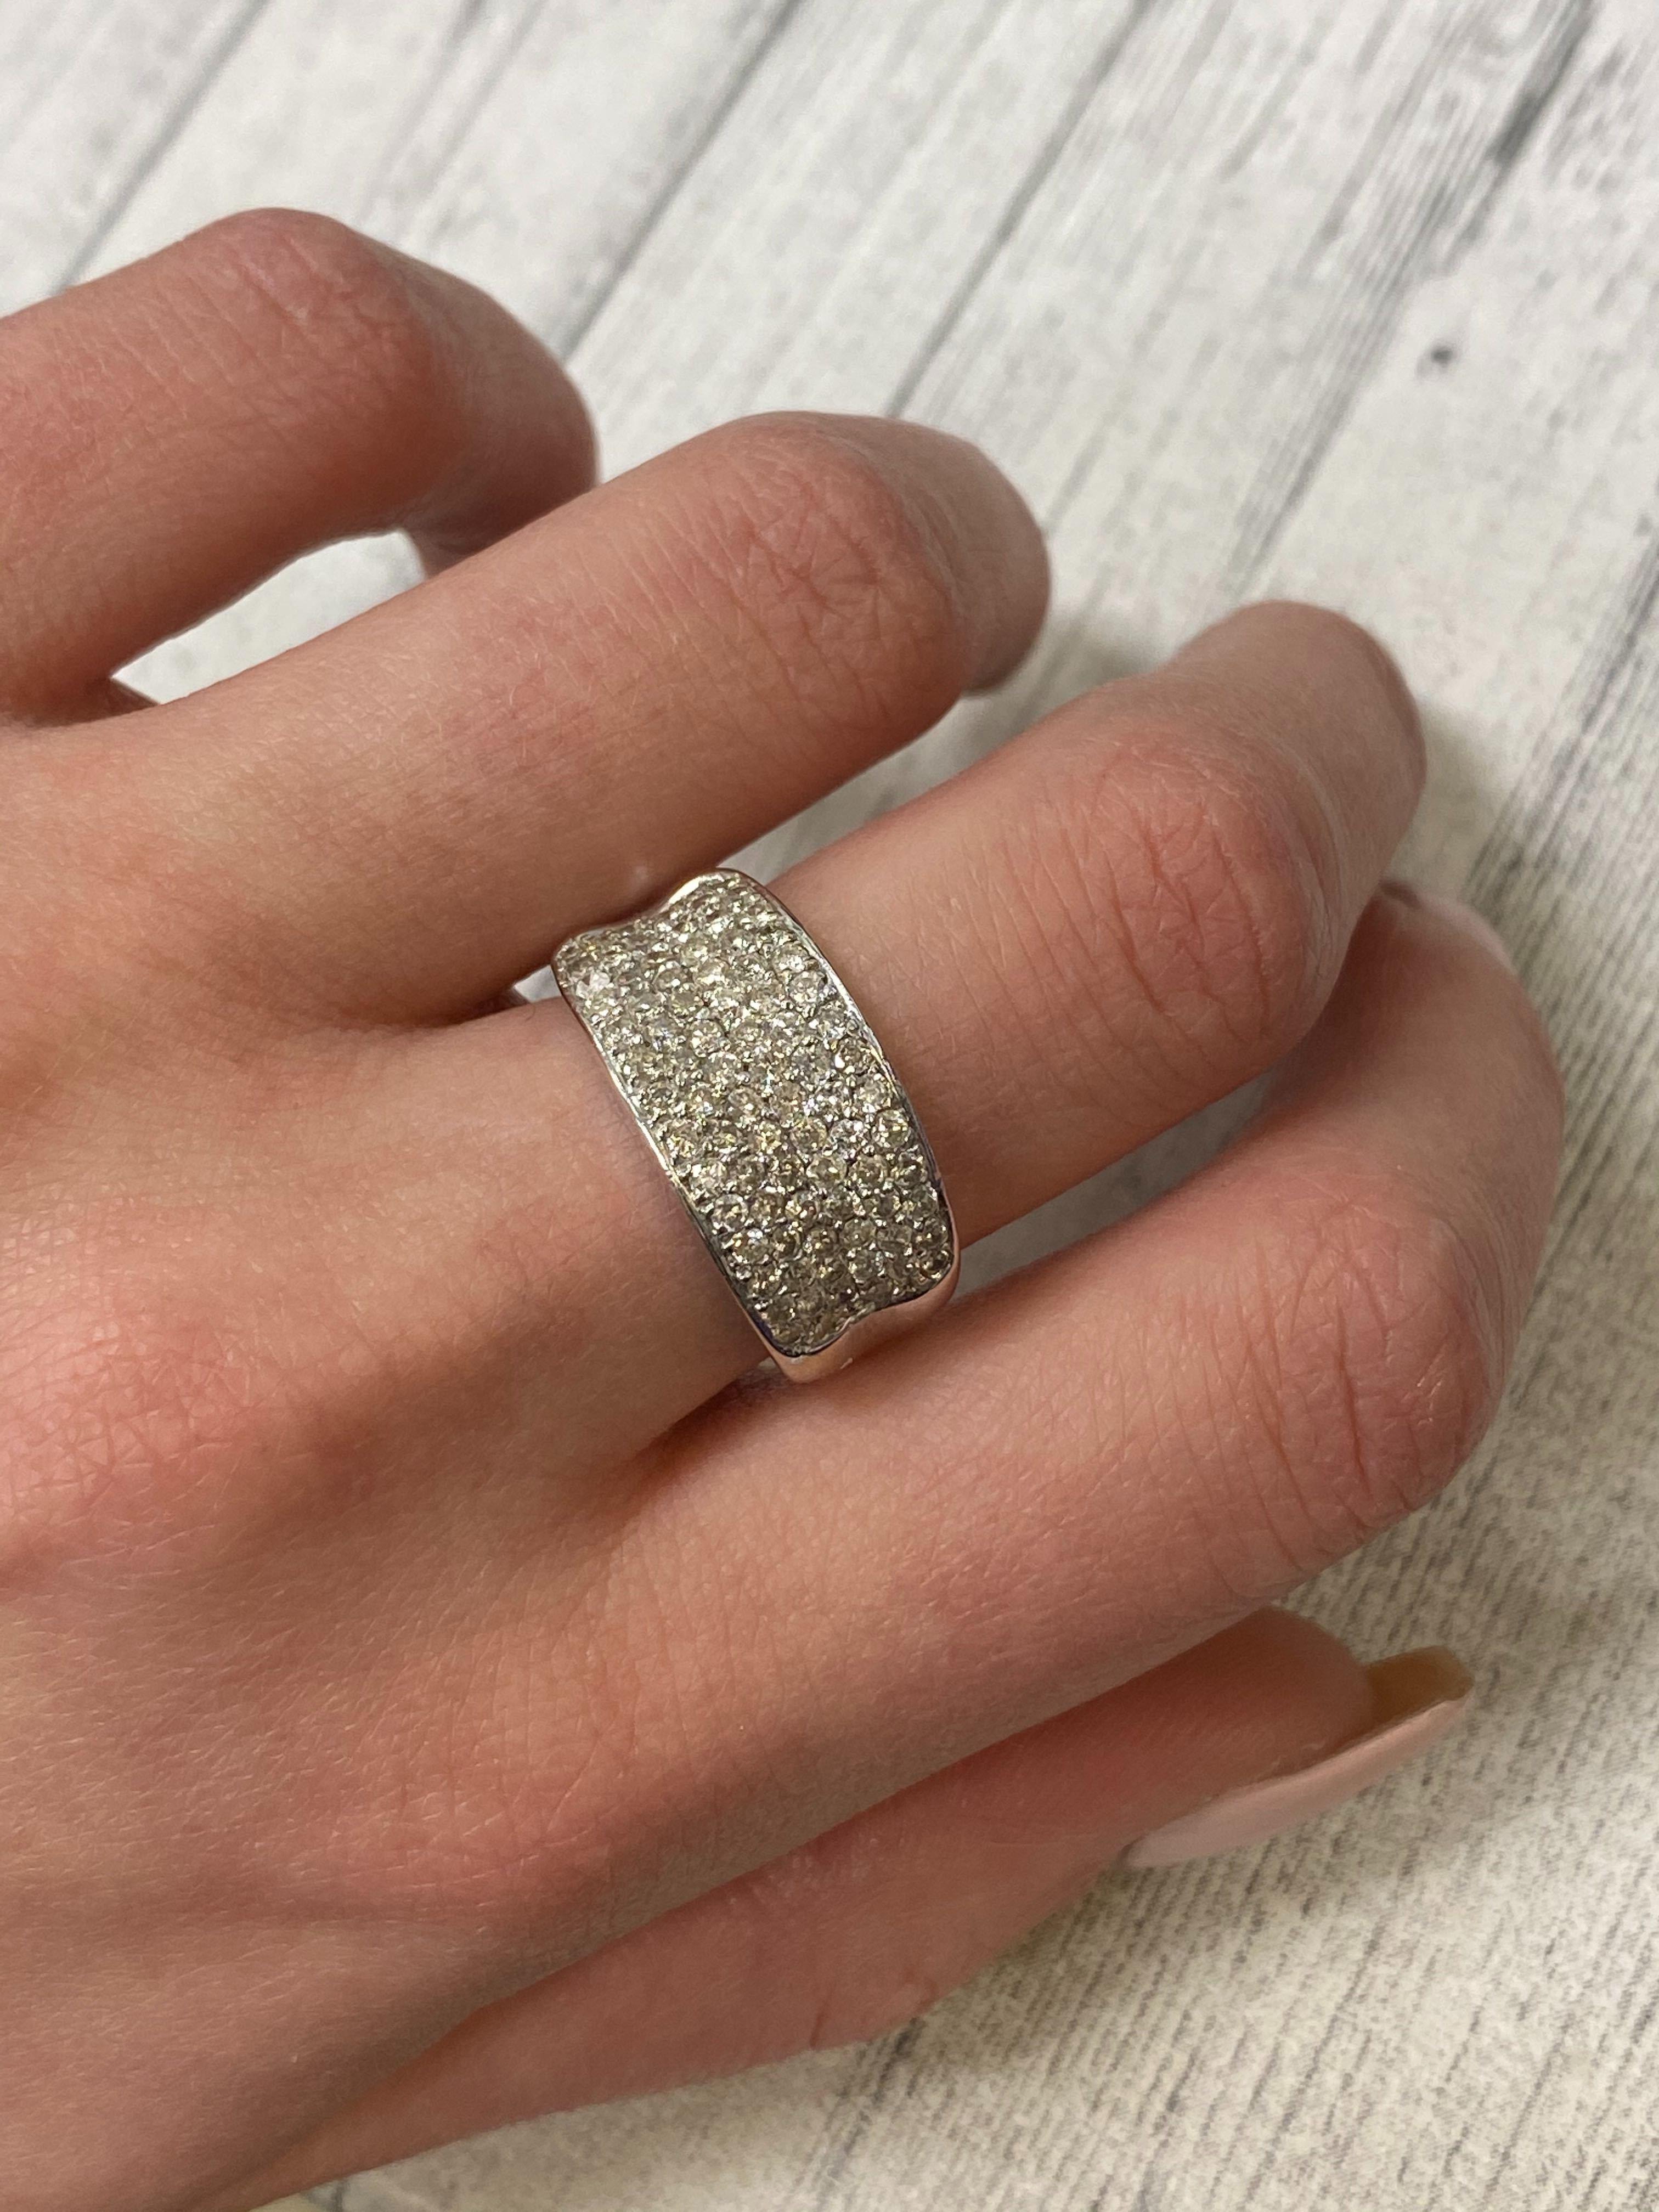 Rachel Koen Diamond Wide Band Ring 14K White Gold 1.00 Cttw In New Condition For Sale In New York, NY